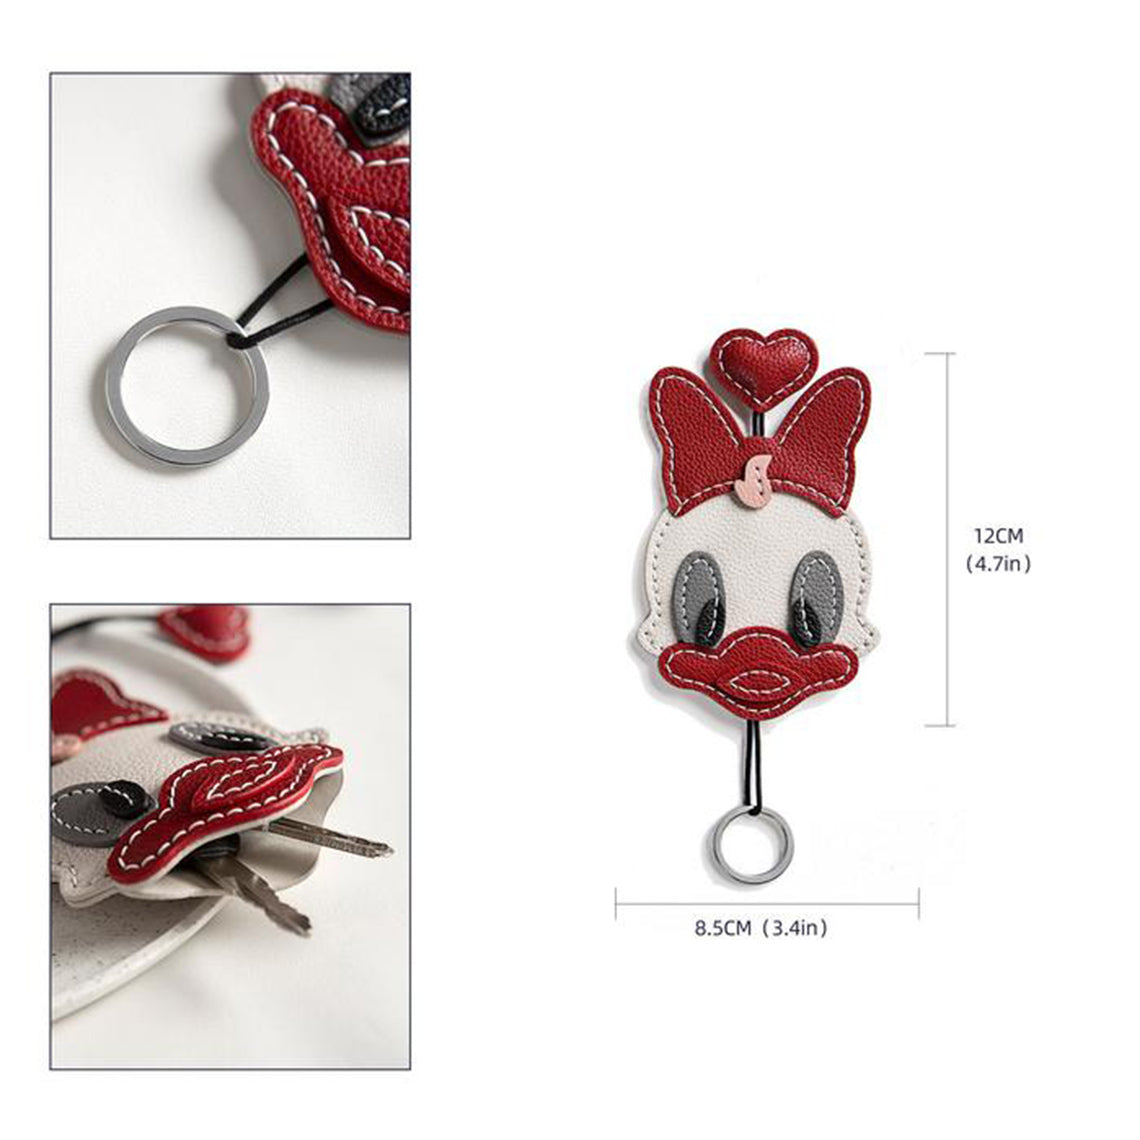 Cute Red Donald Duck Keychain Size - Donald Duck Gift - Ornament Charm | POPSEWING™